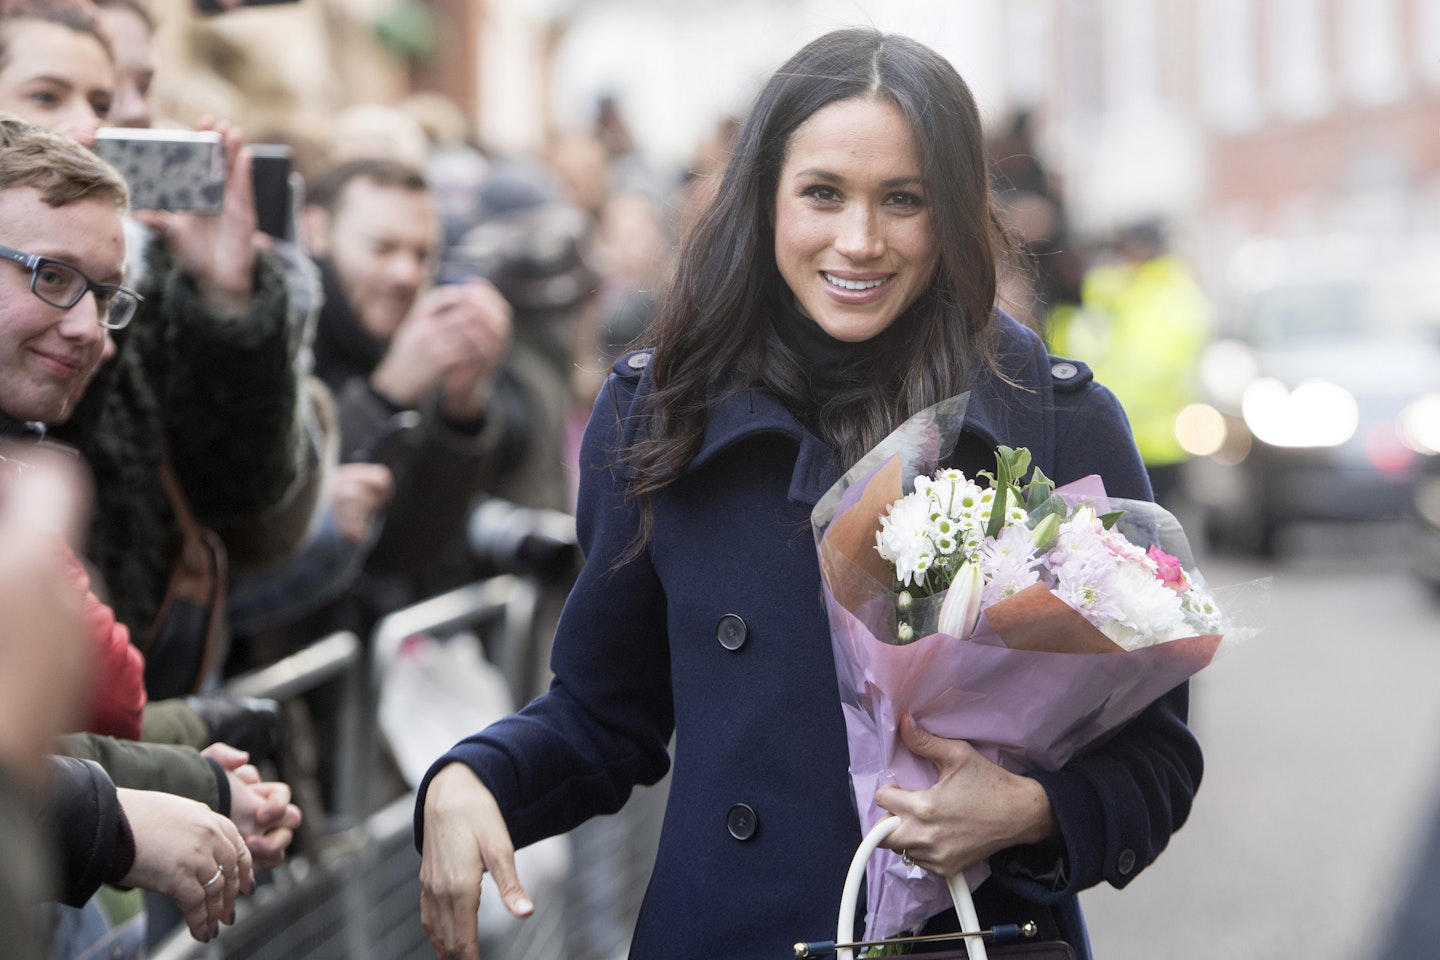 Meghan Markle's Strathberry Leather Bag Is Being Auctioned For Charity